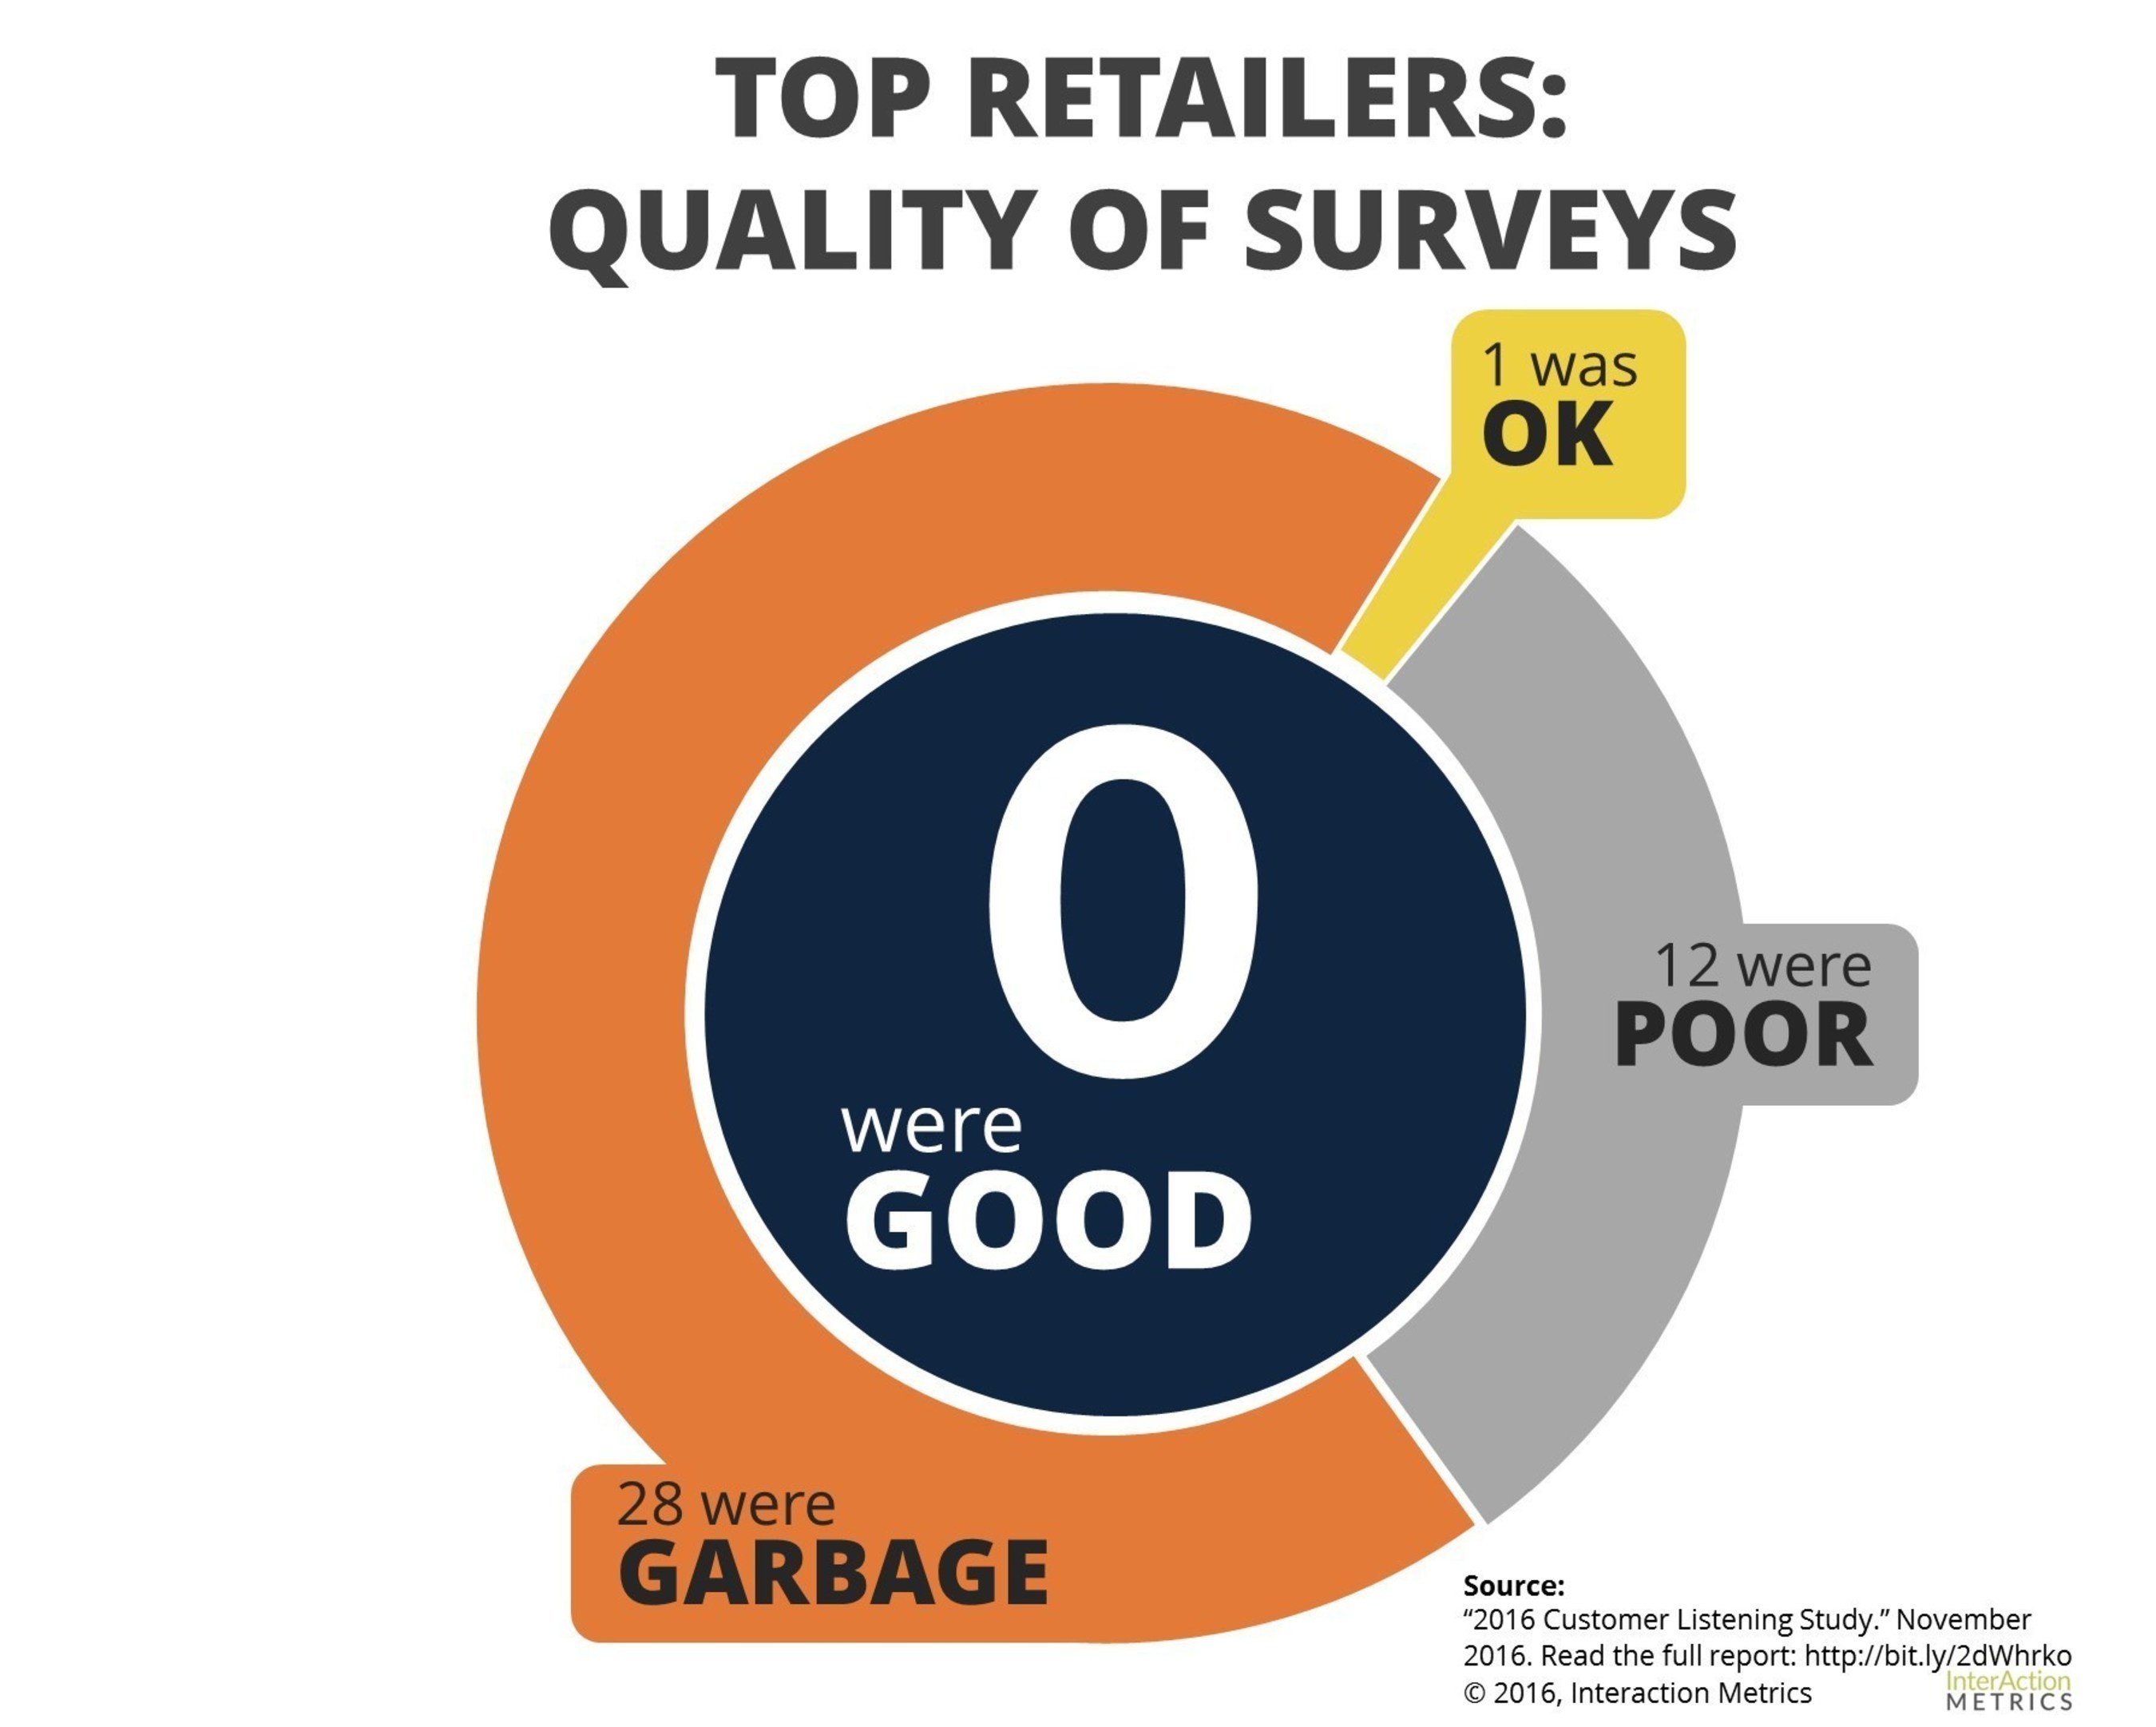 None of the 51 top US retailers studied used high quality customer satisfaction surveys.